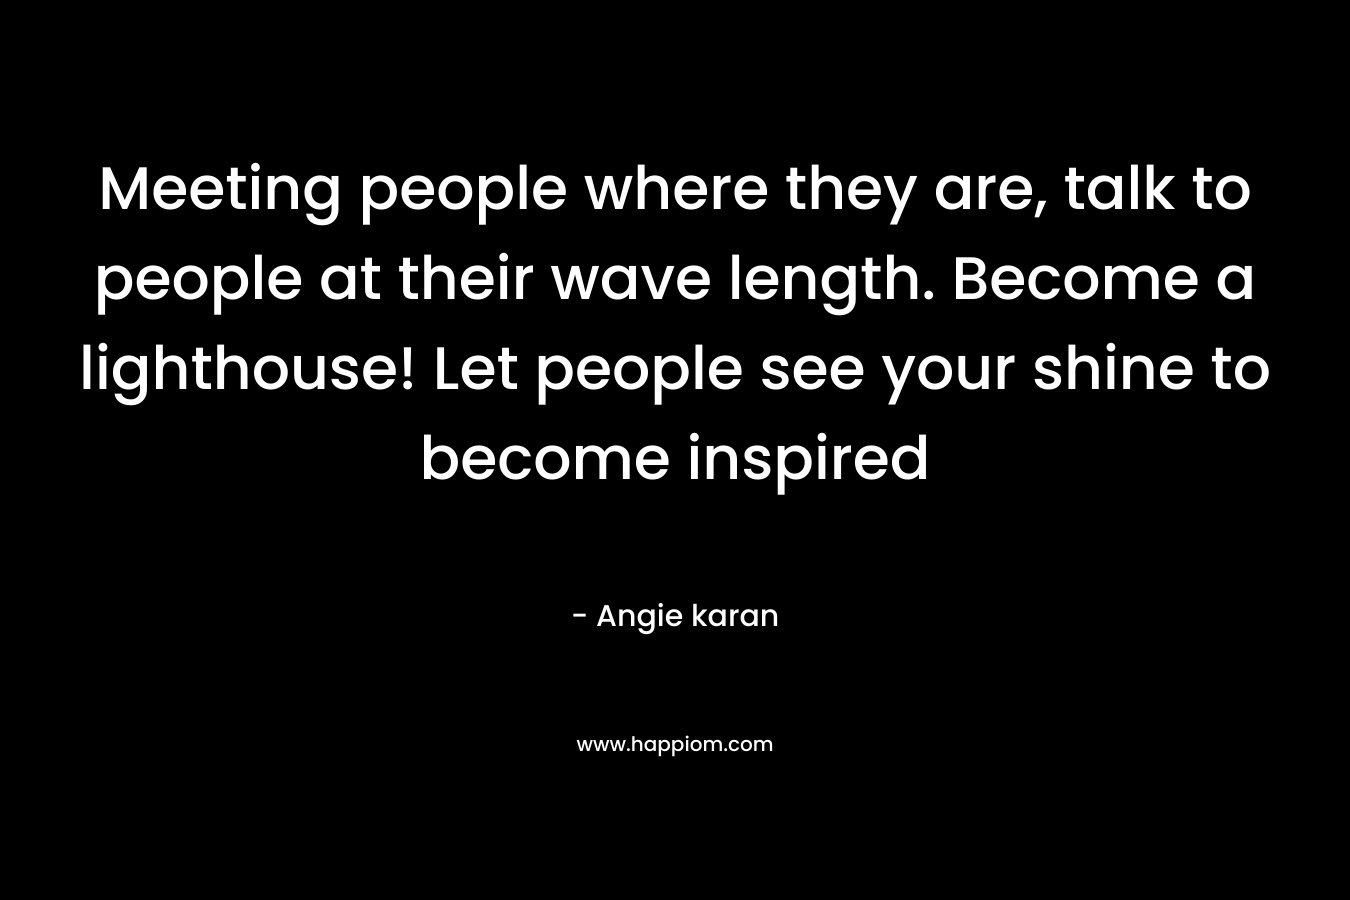 Meeting people where they are, talk to people at their wave length. Become a lighthouse! Let people see your shine to become inspired – Angie karan